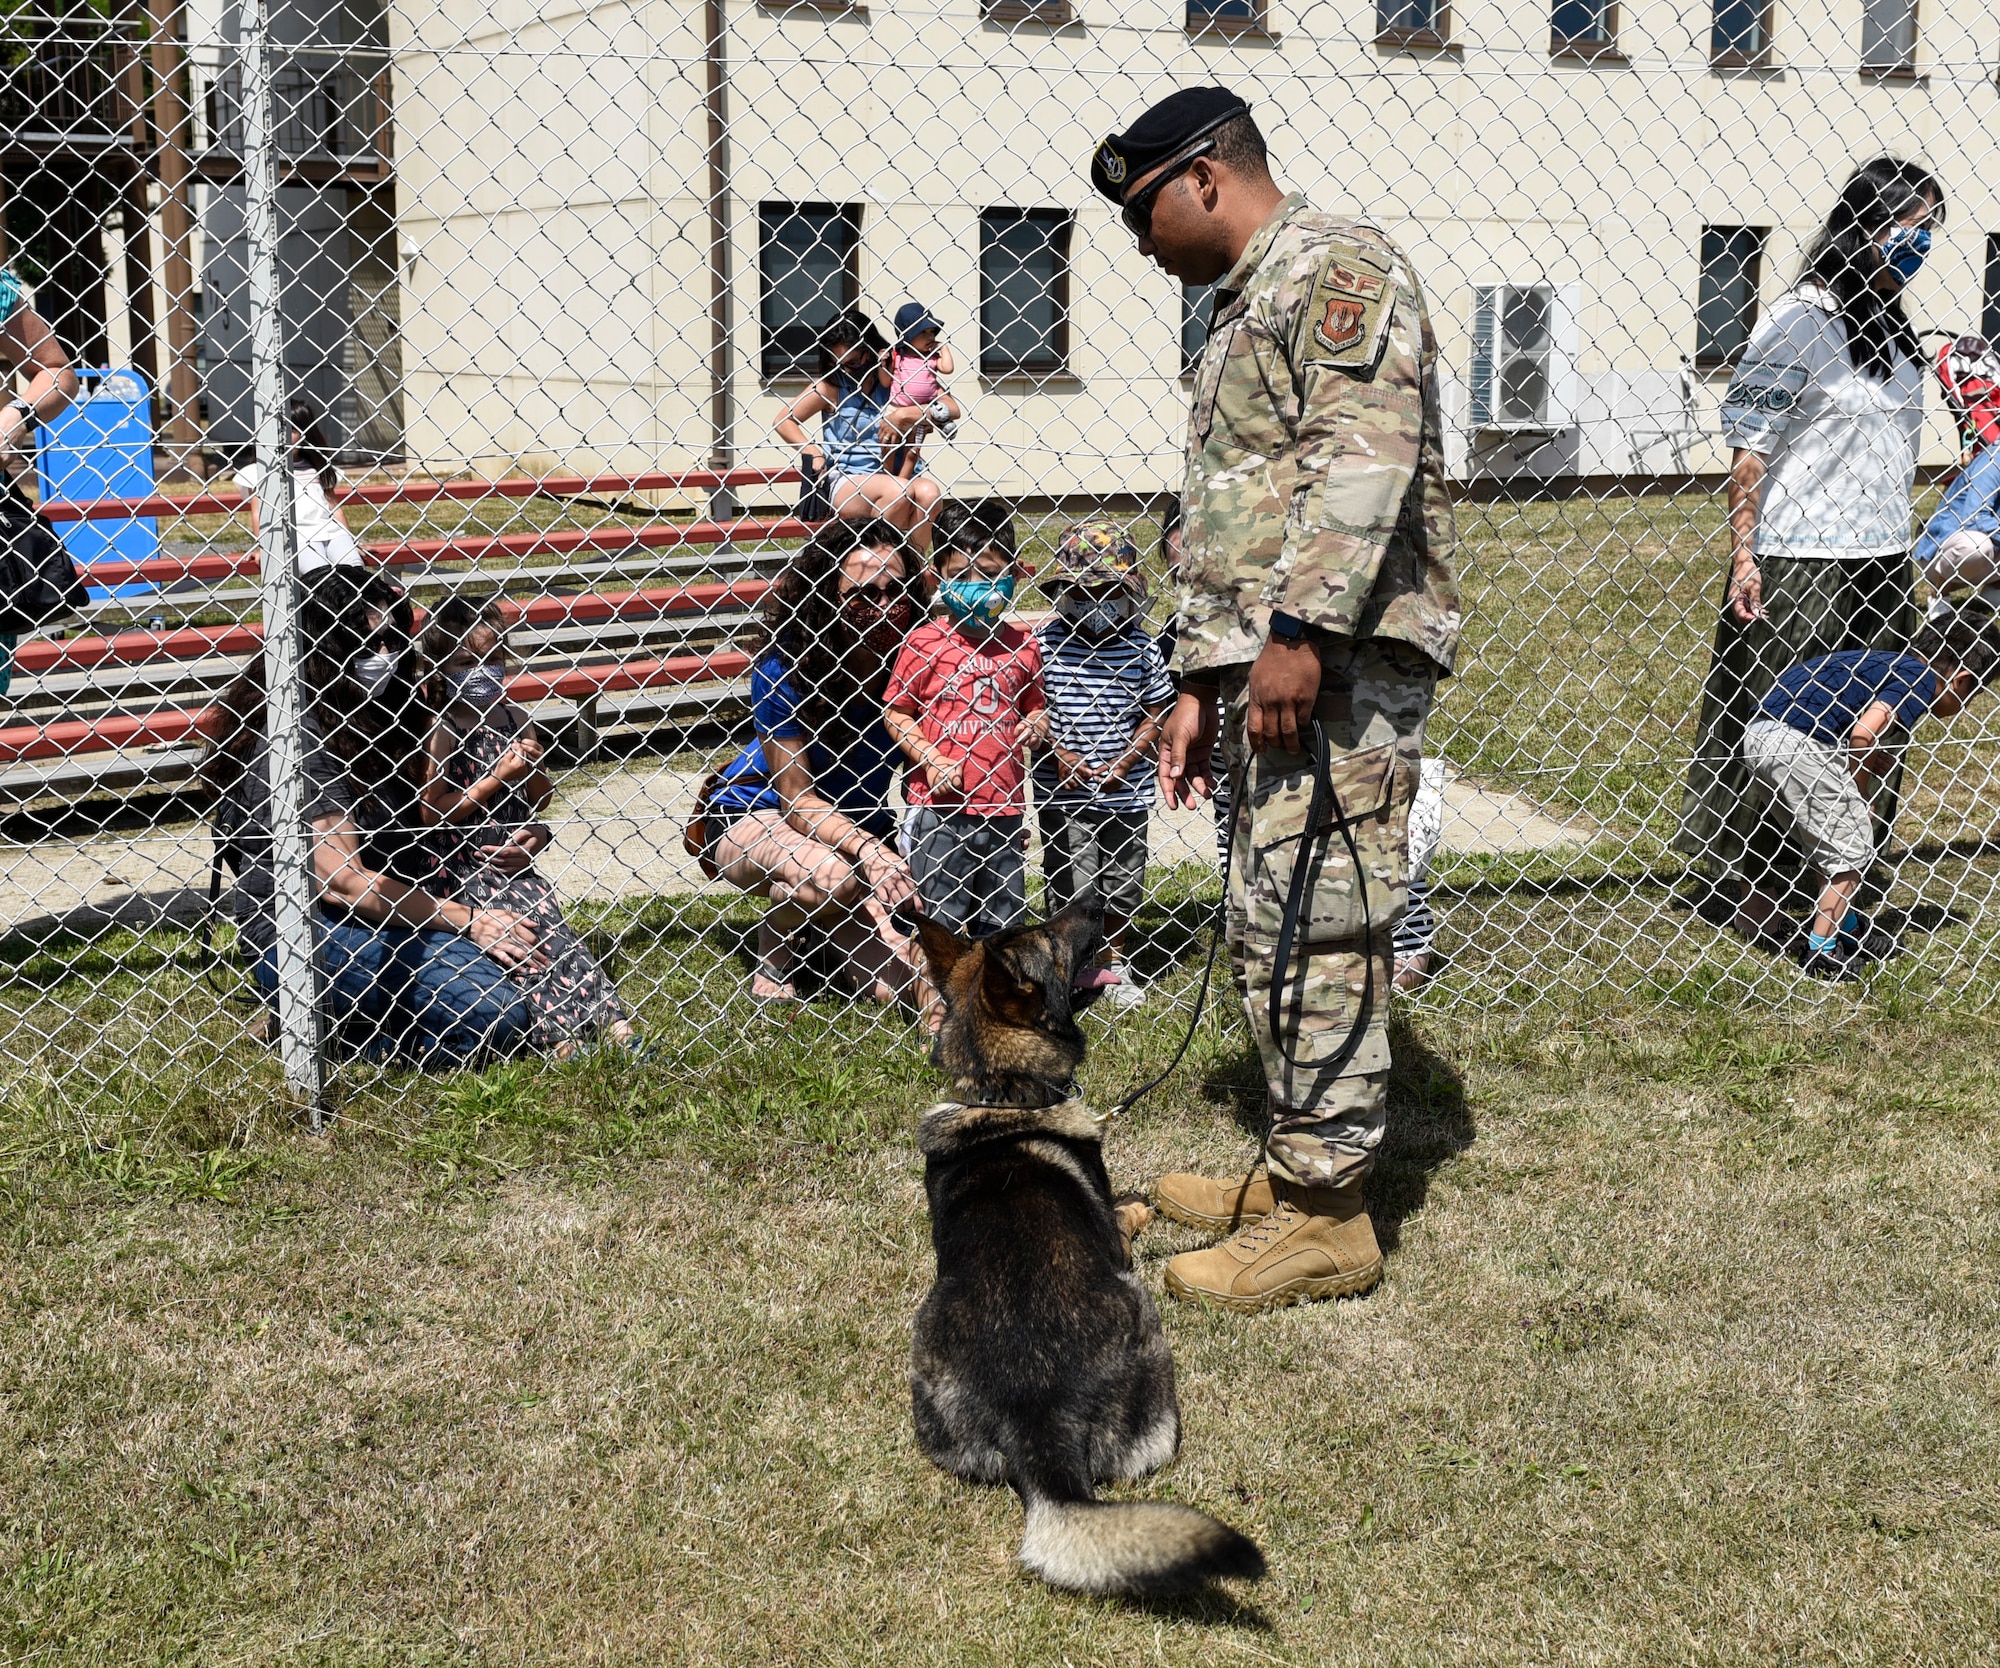 U.S. Air Force Tech. Sgt. Dontae Stamps, 52nd Security Forces Squadron military working dog handler, and Axel, an MWD, interact with children and families at Spangdahlem Air Base, Germany, July 22, 2020. Stamps answered any questions Spangdahlem AB families had about handling an MWD and their training. (U.S. Air Force photo by Senior Airman Melody W. Howley